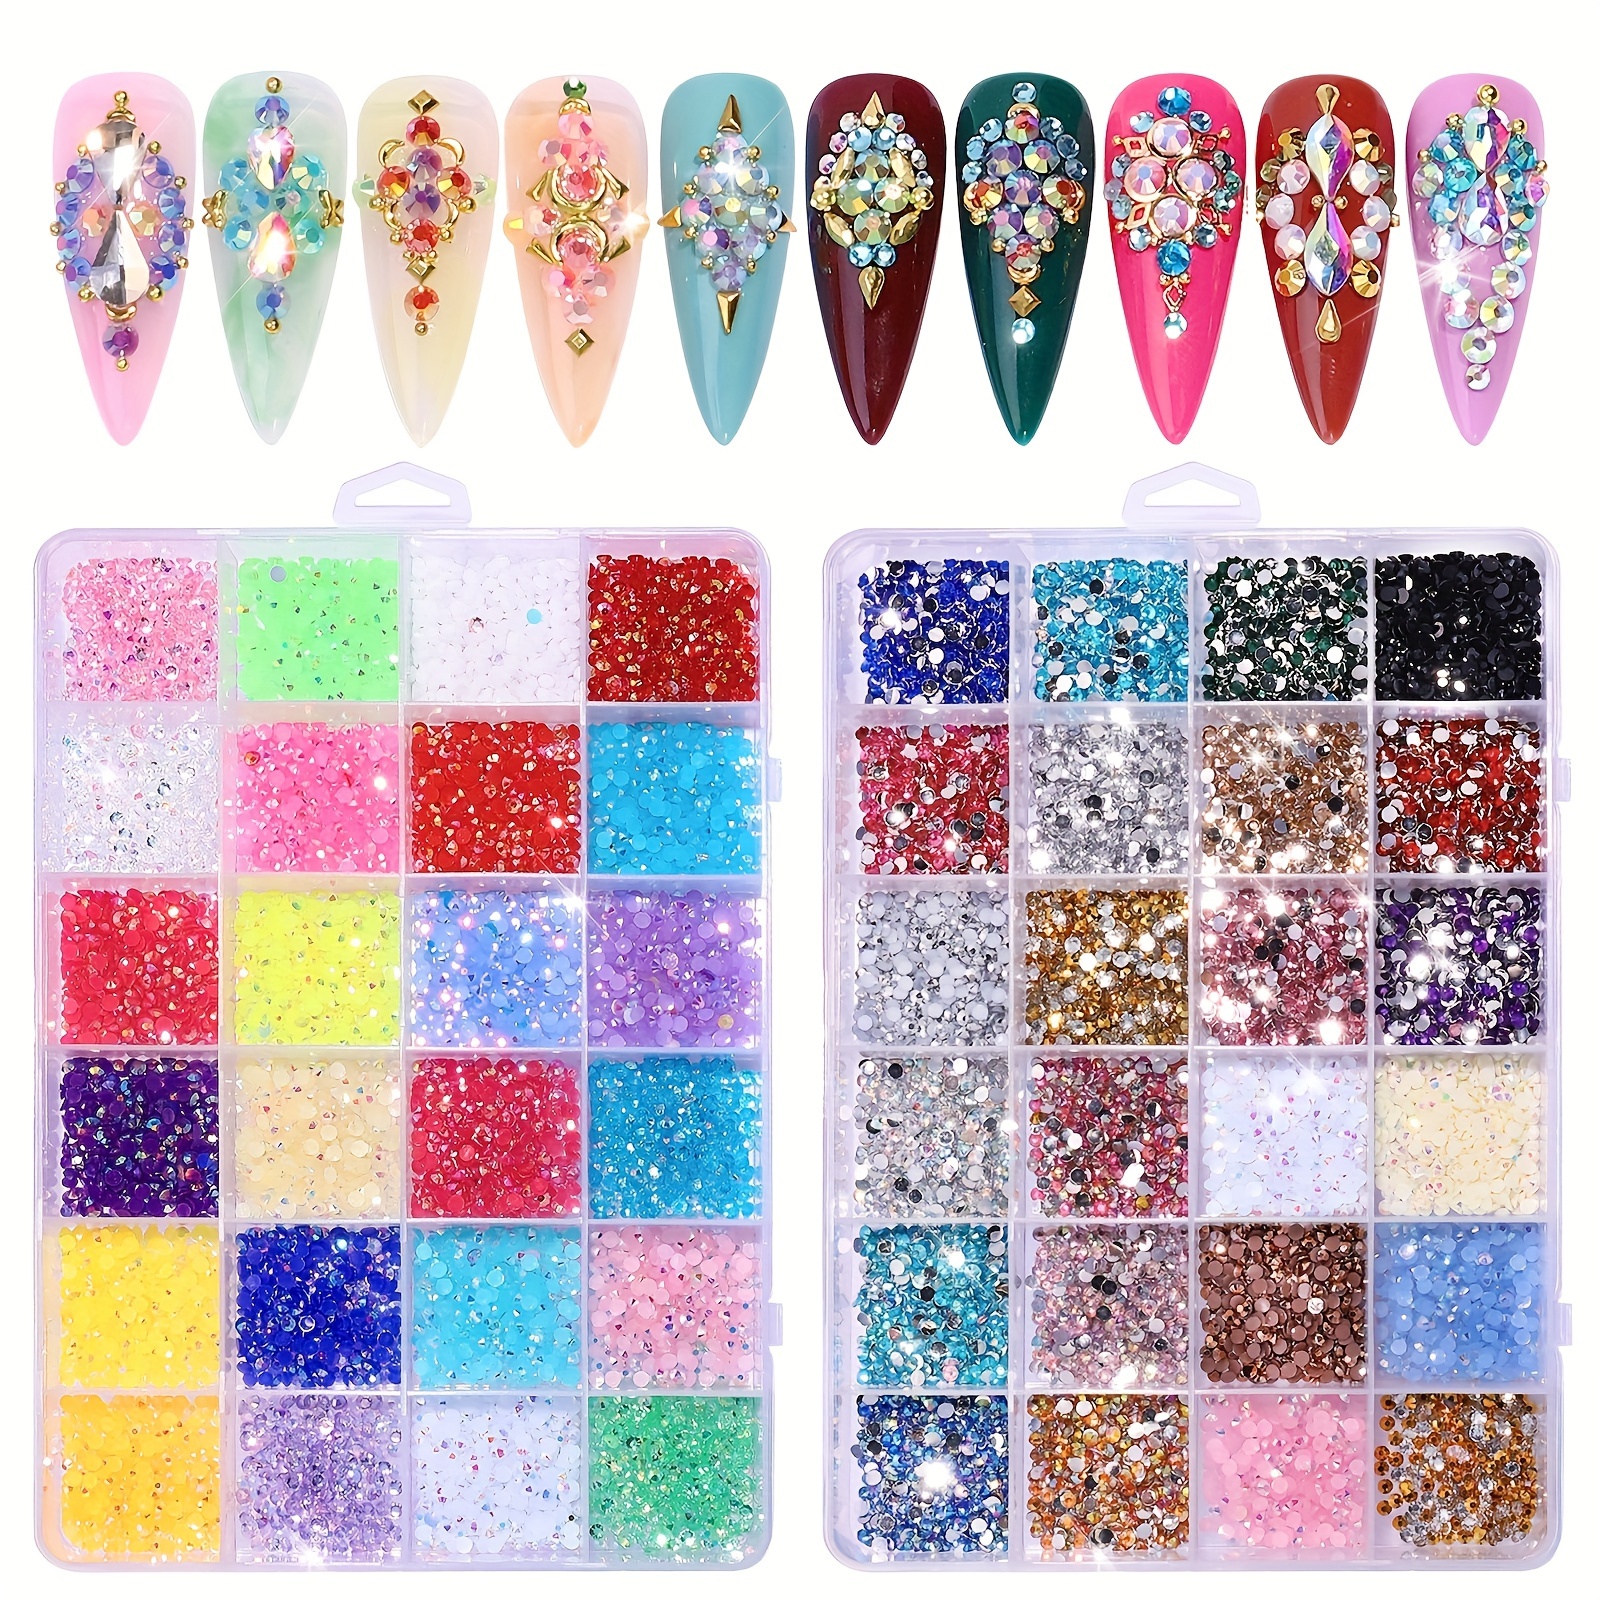 

24 Grids Nail Art Flatback Resin Rhinestones, Fluorescent Ab Crystal Gems, Diy Jewelry Accessories For Manicure Decoration